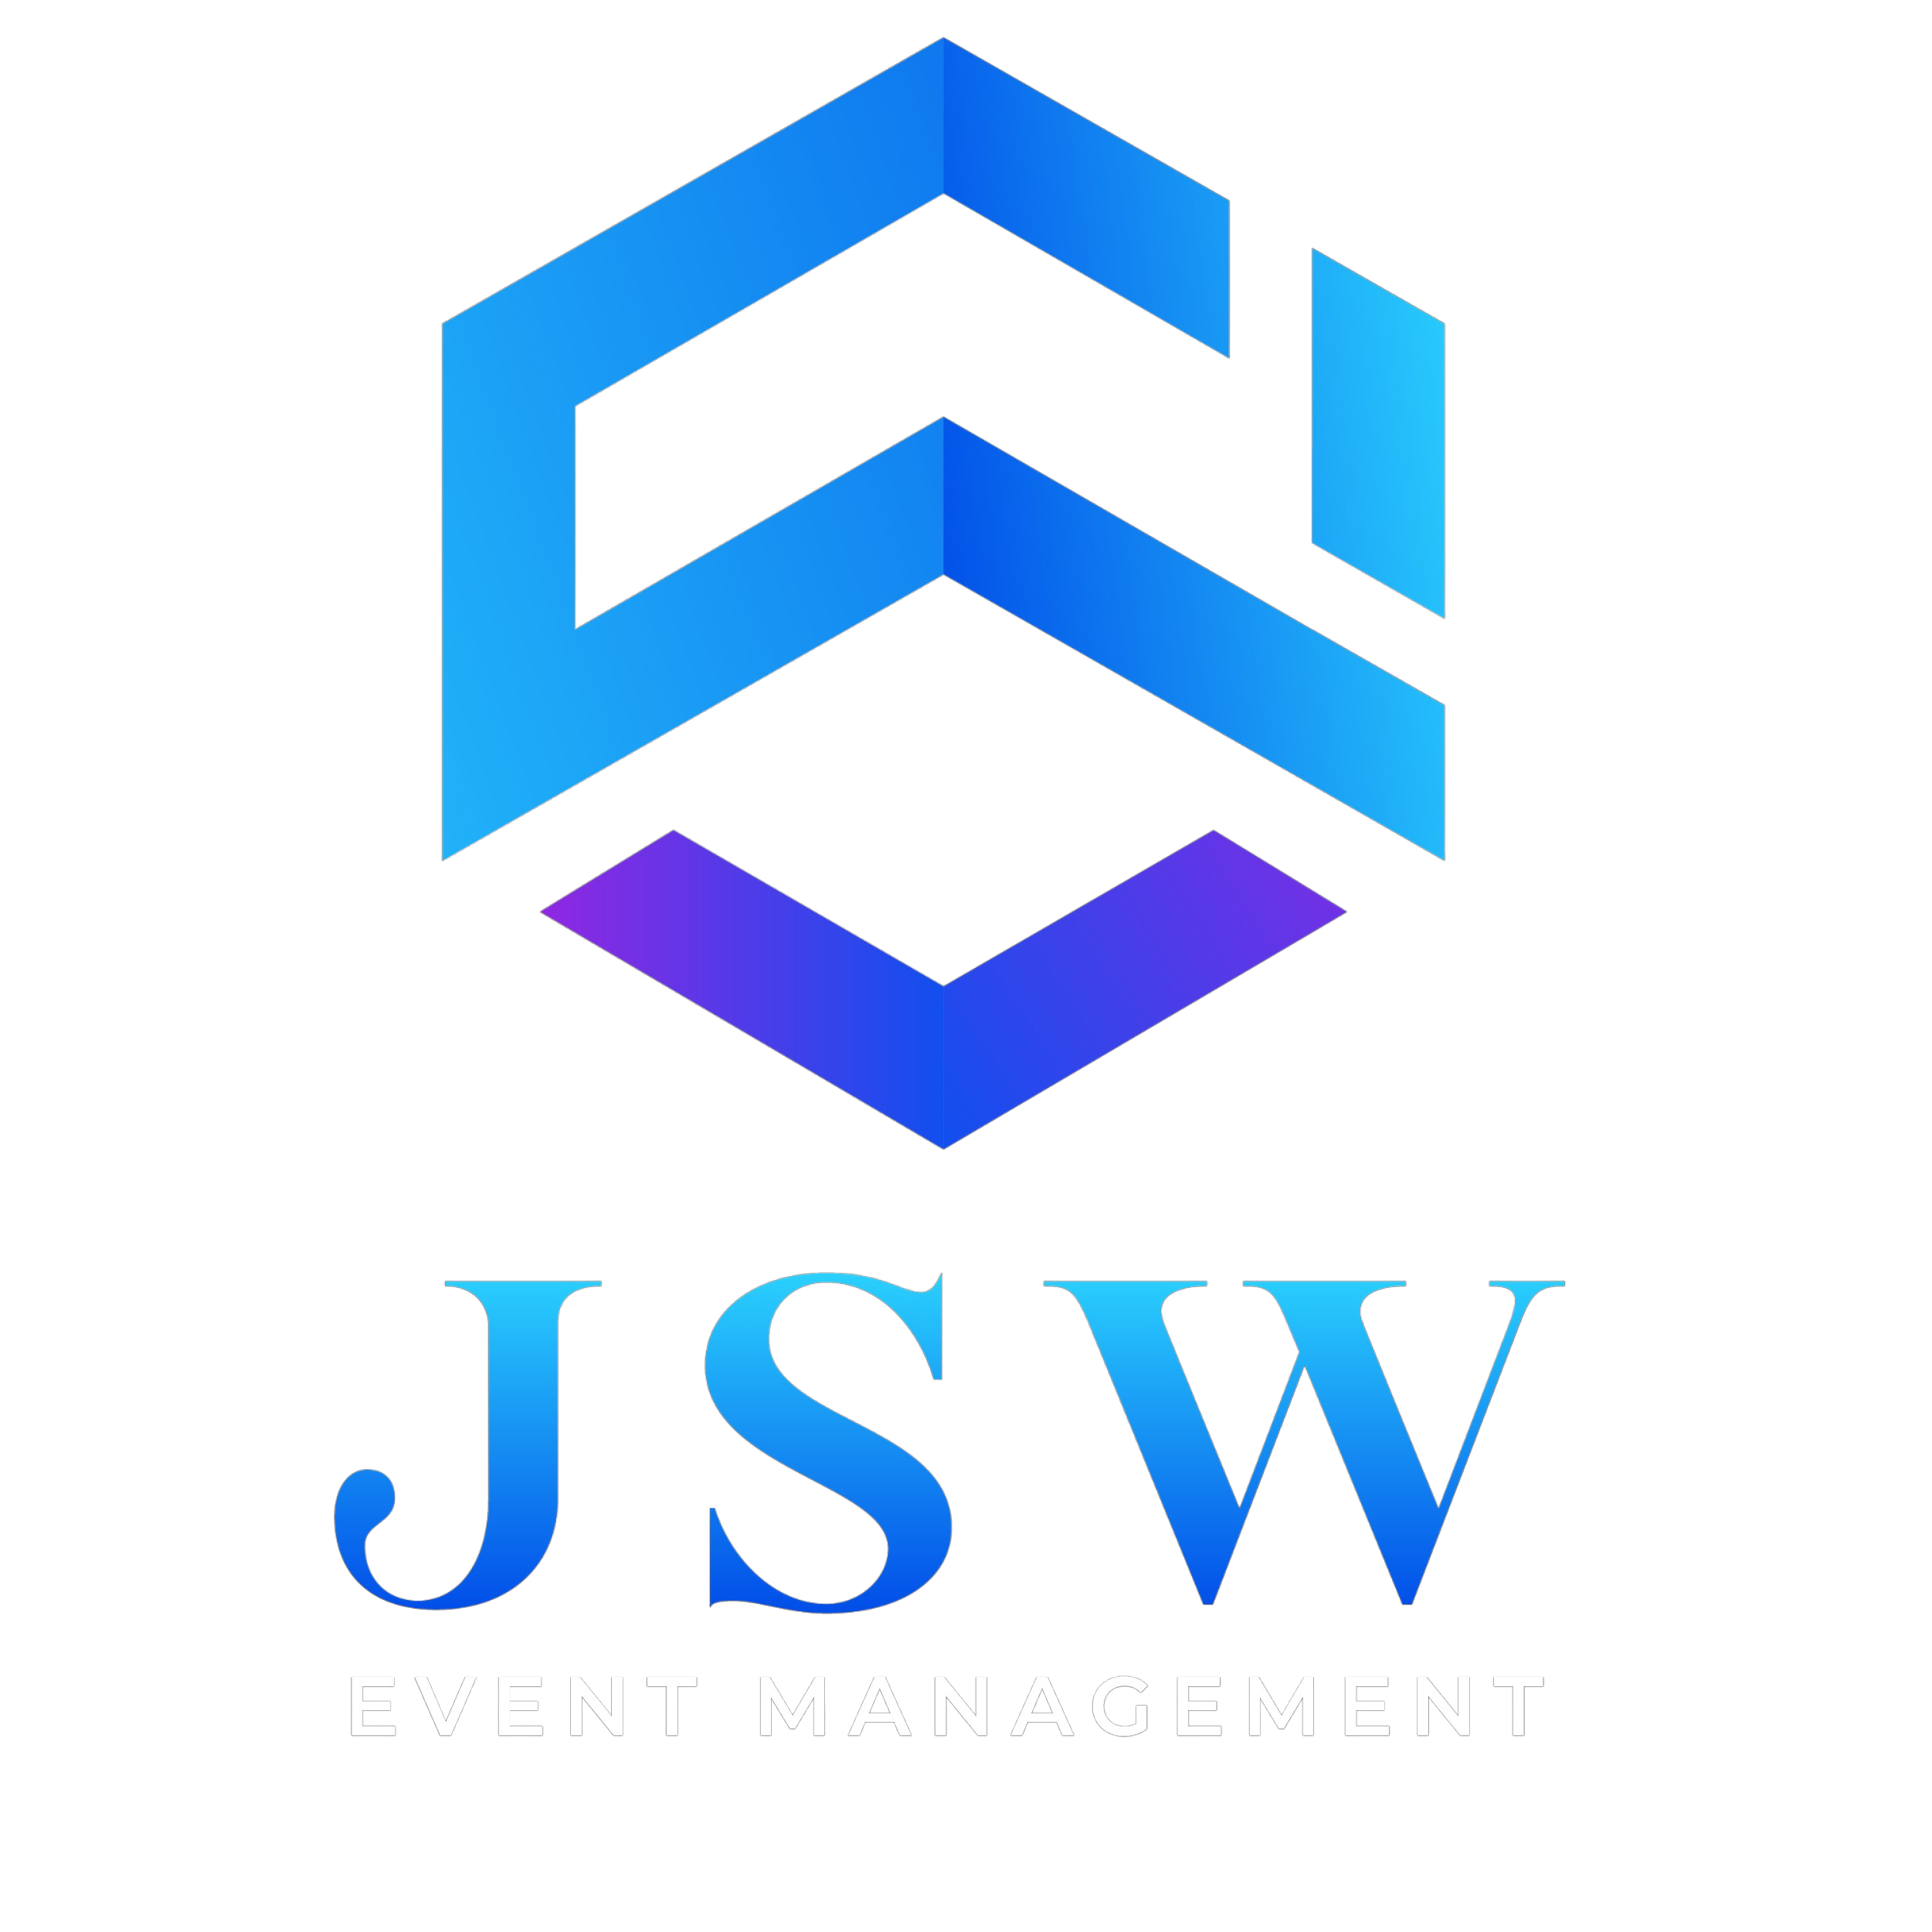 Event management logo Royalty Free Vector Image